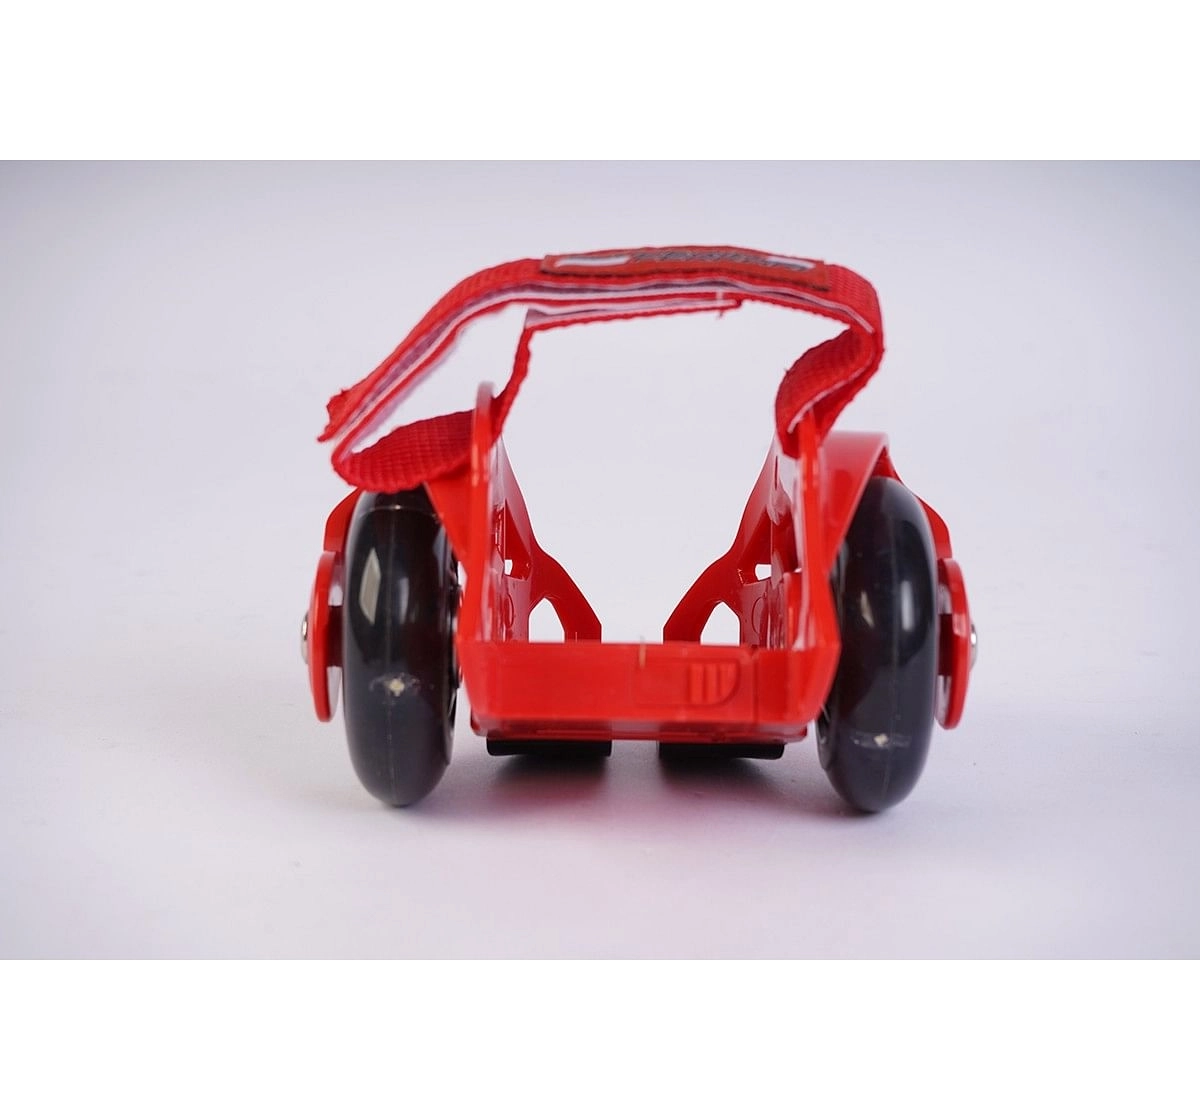 Ferrari Flashing Wheels - Skates and Skateboards for Kids age 6Y+ (Red)